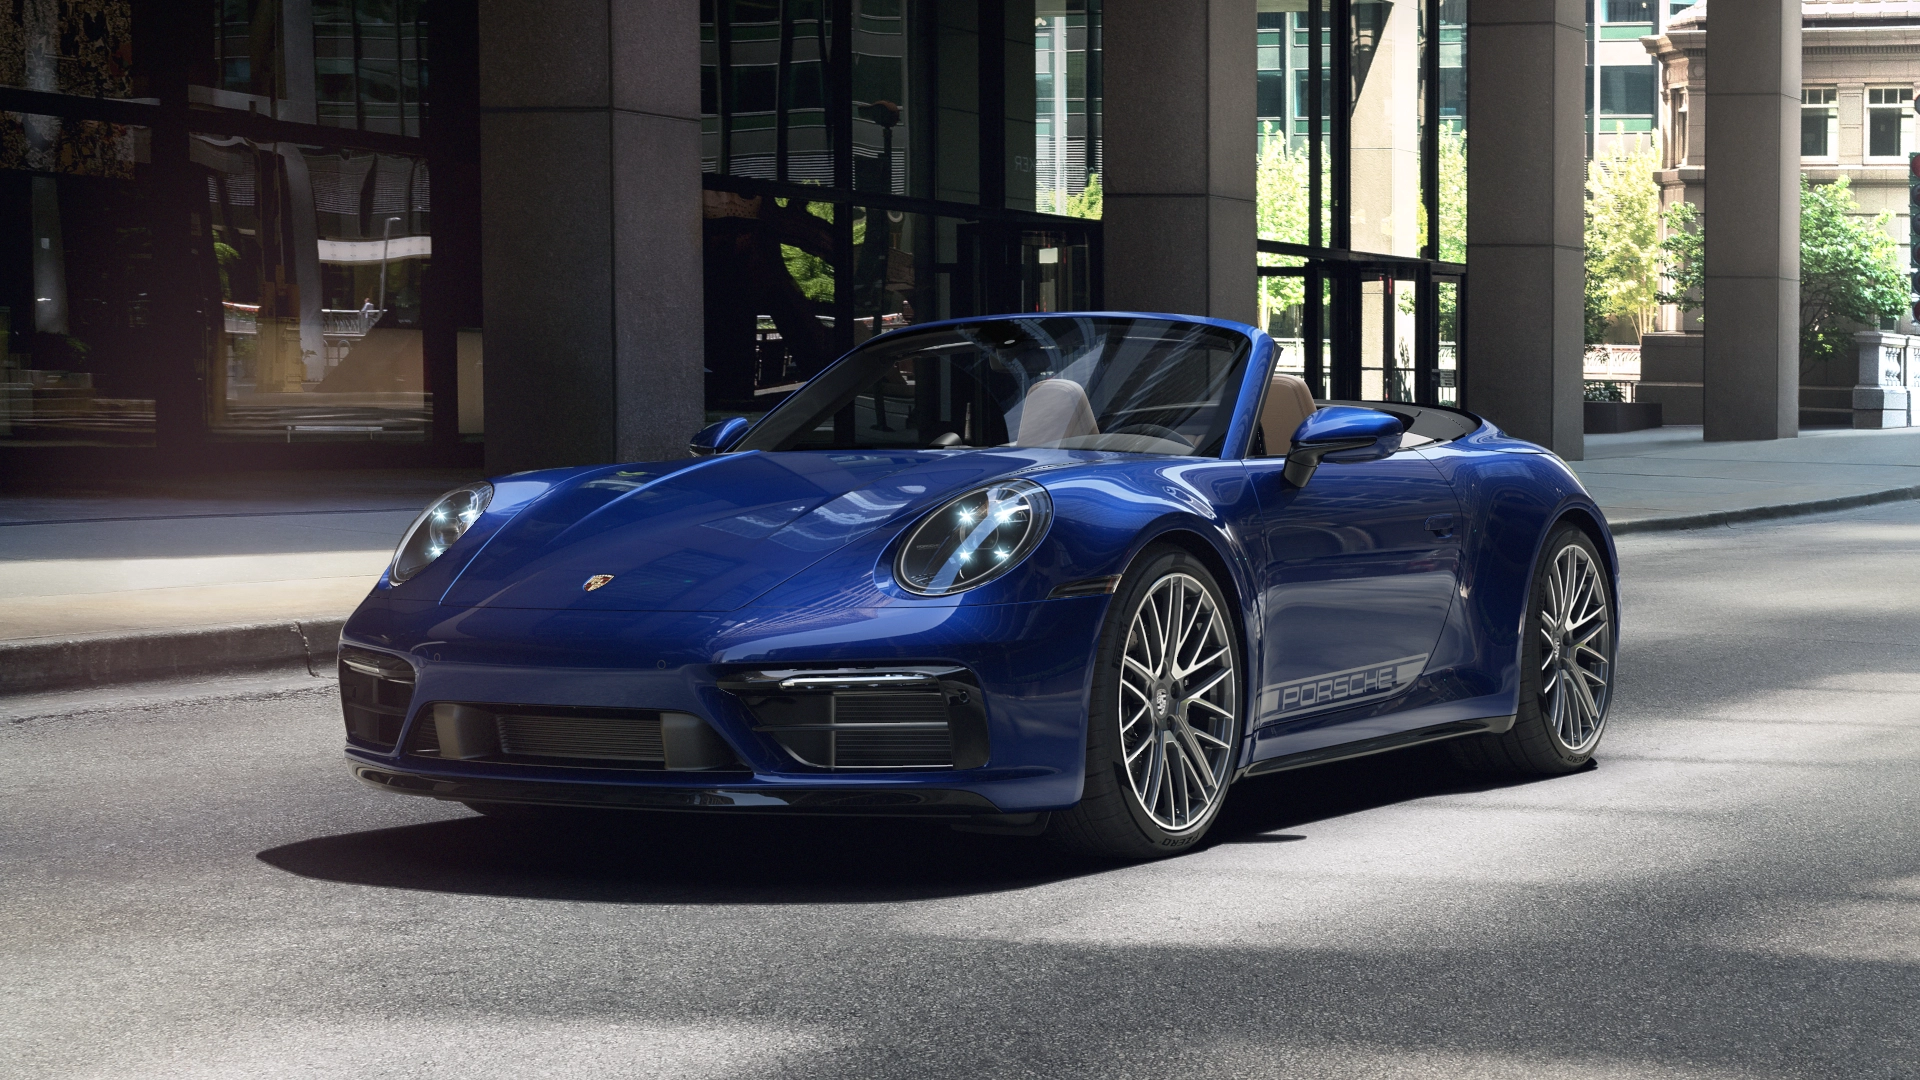 911 Carrera 4S Cabriolet front view